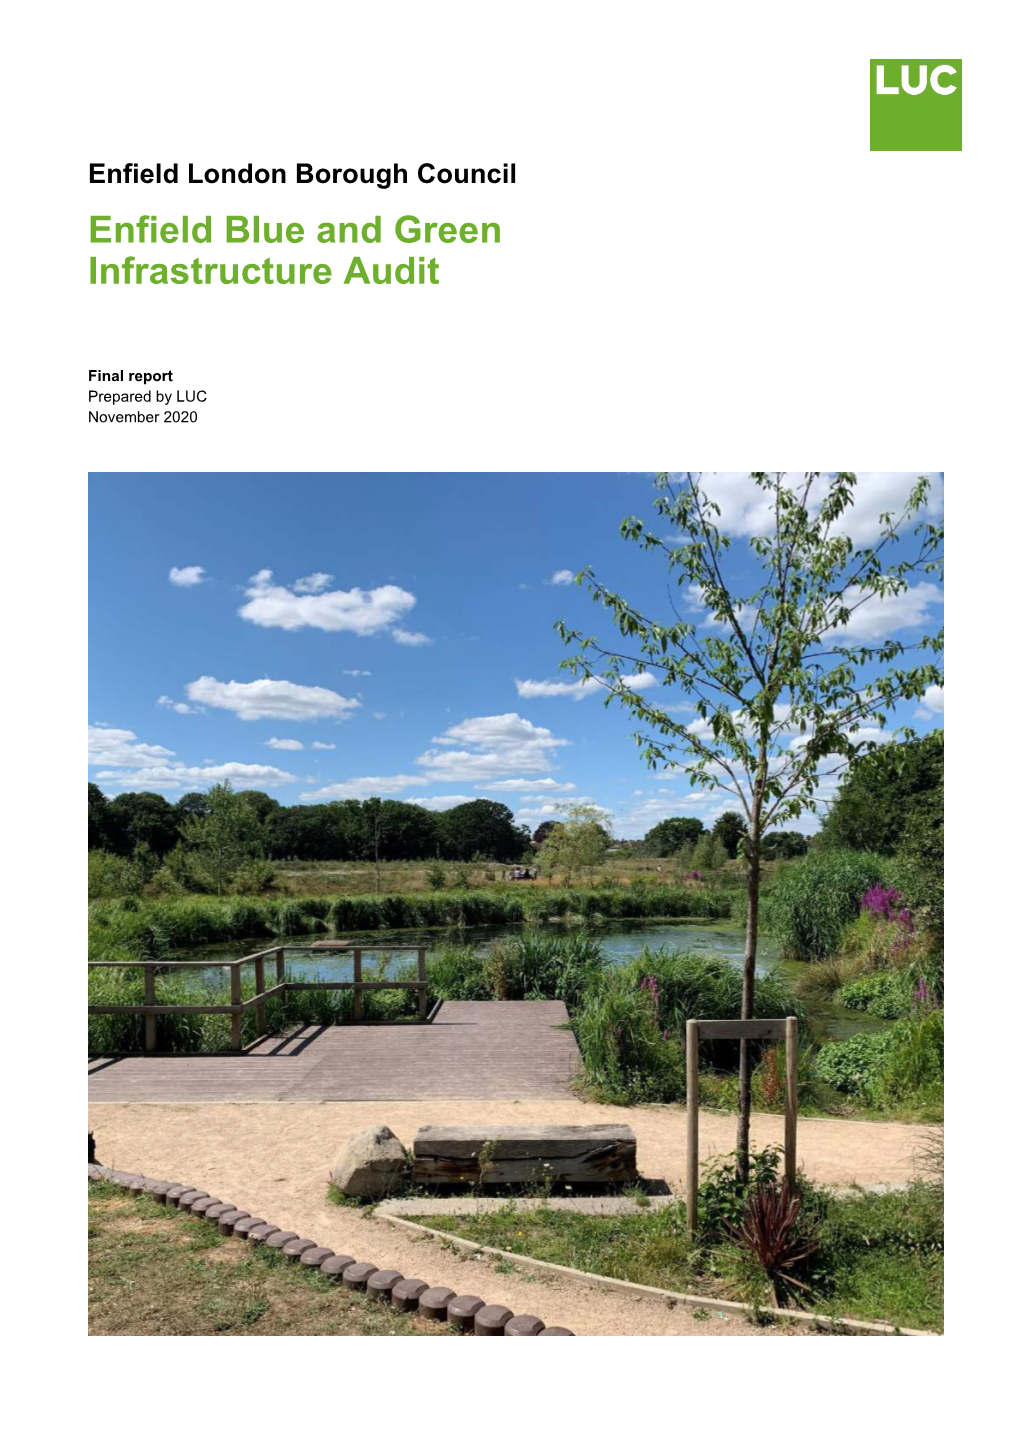 Enfield Blue and Green Infrastructure Audit 2020